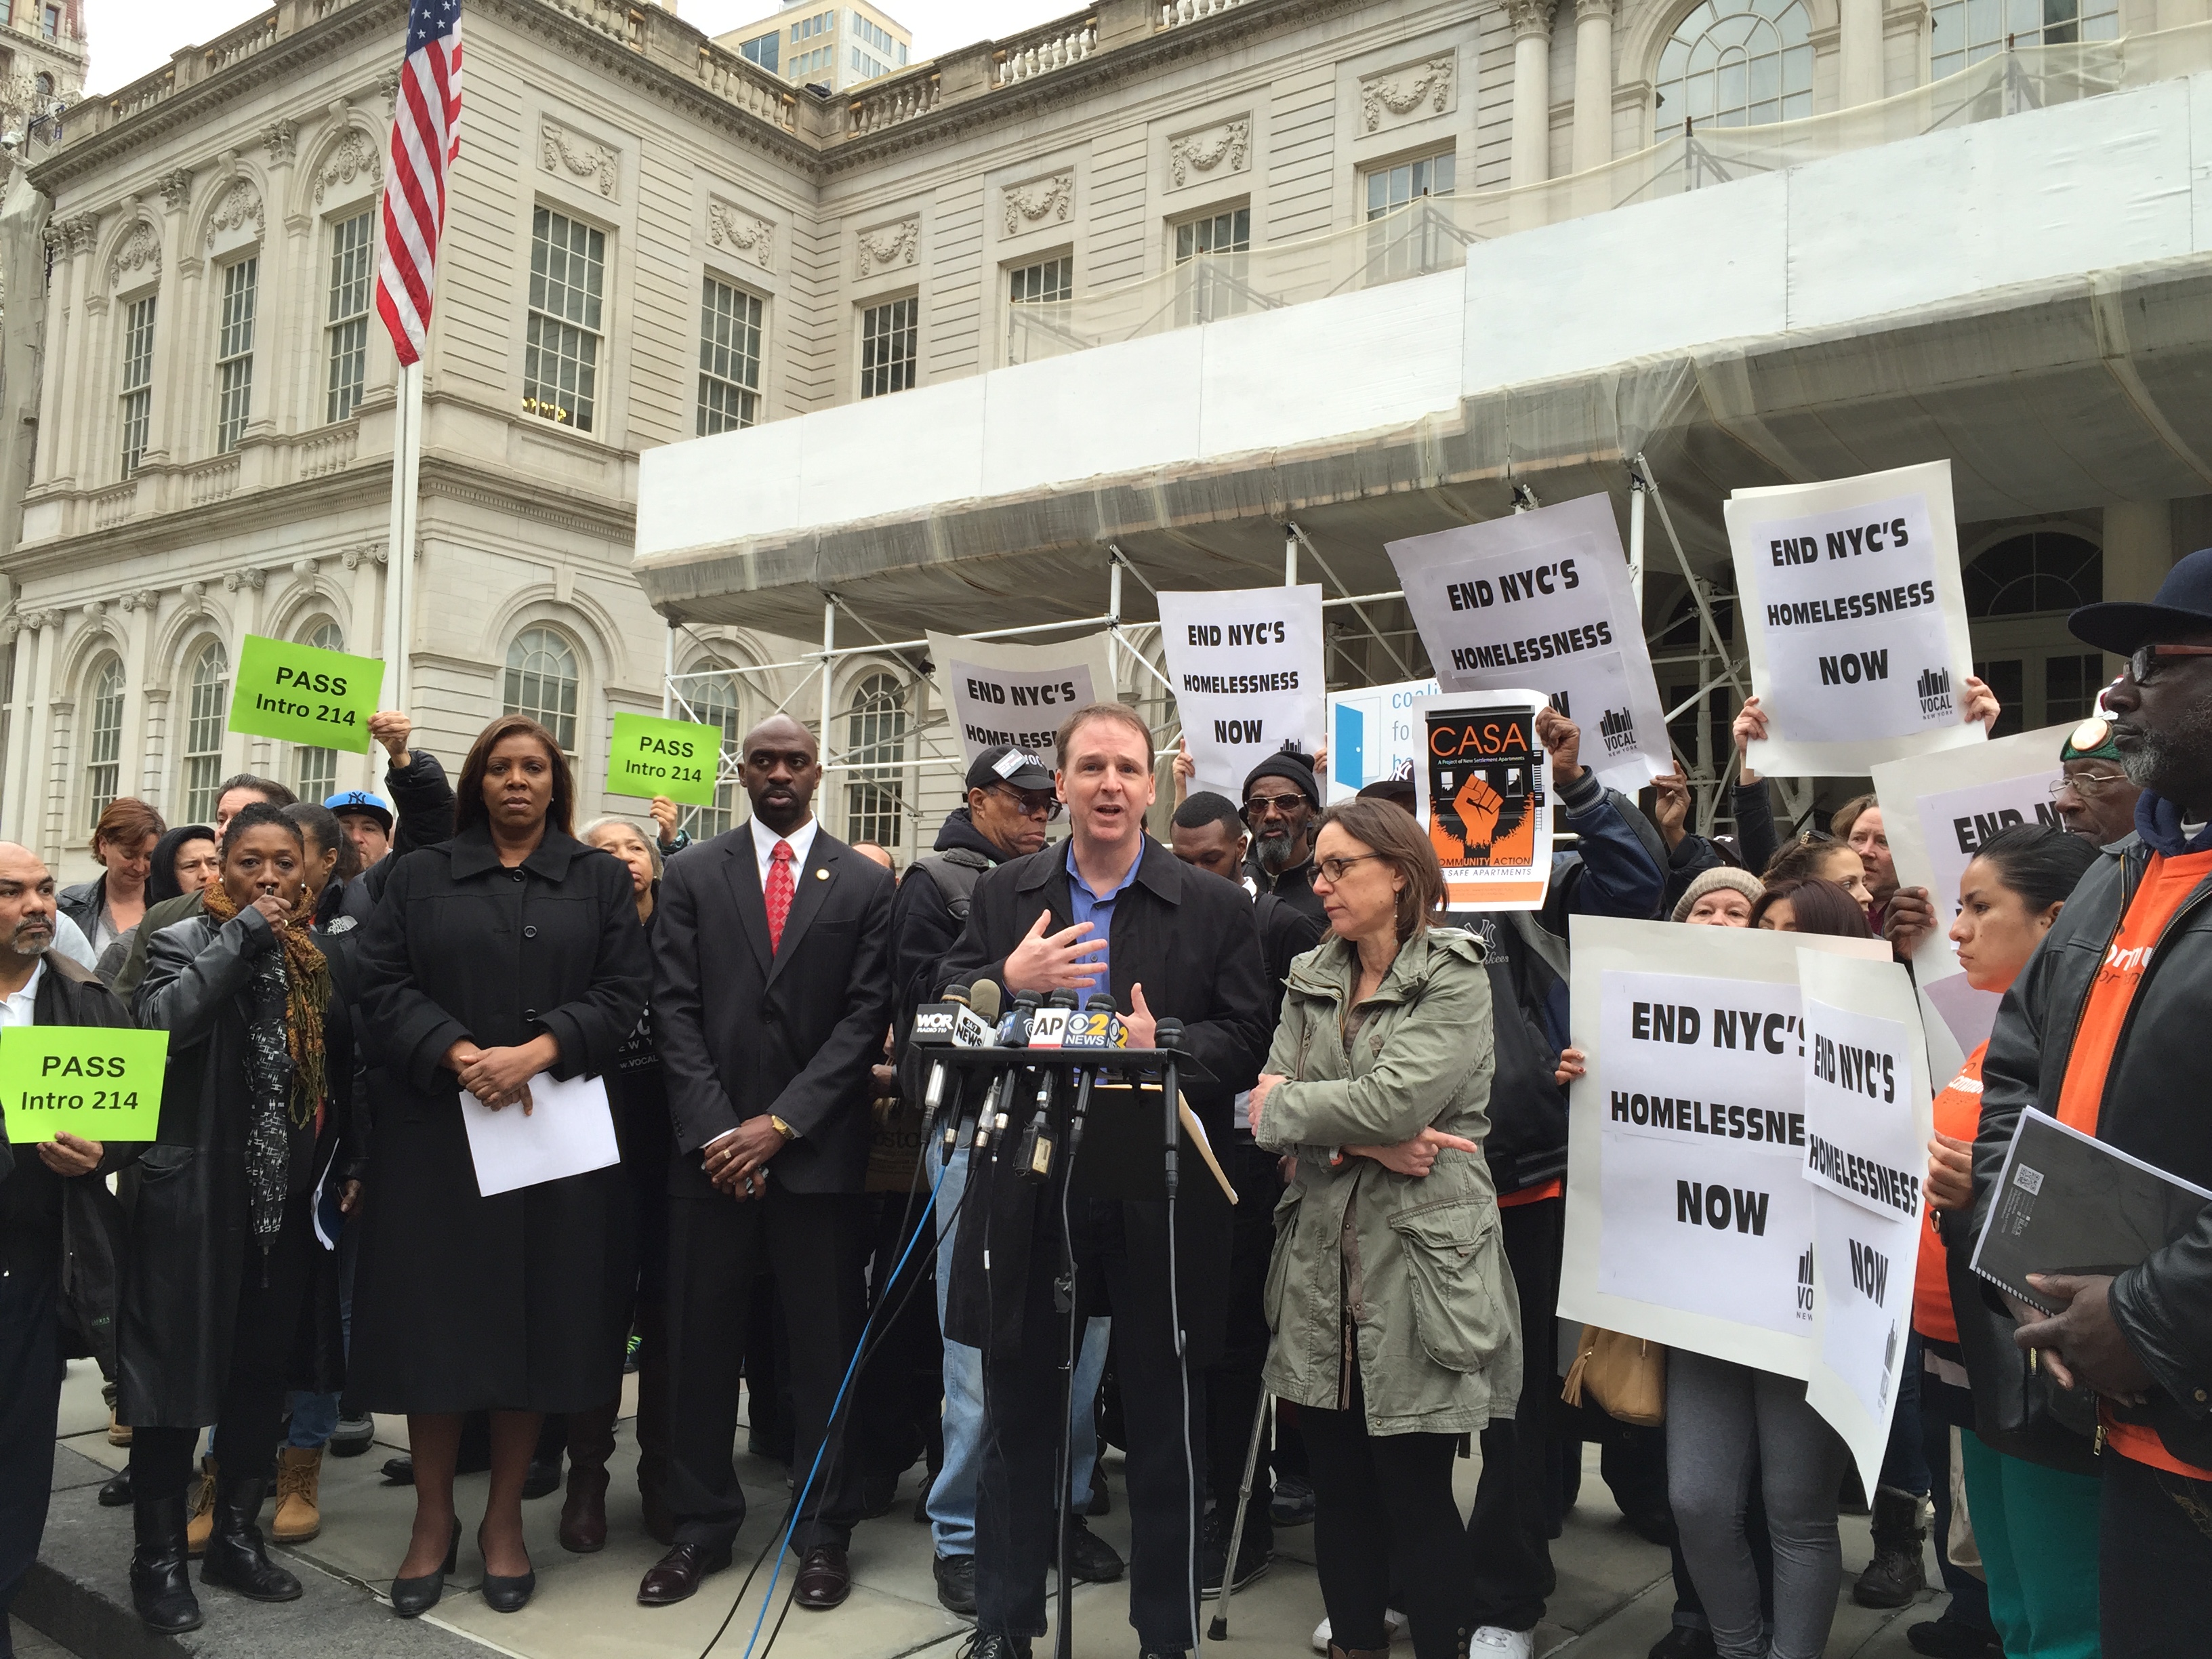 Patrick Markee of the Coalition for the Homeless speaks at a City Hall rally. (Photo: Ben Shapiro/New York Observer)